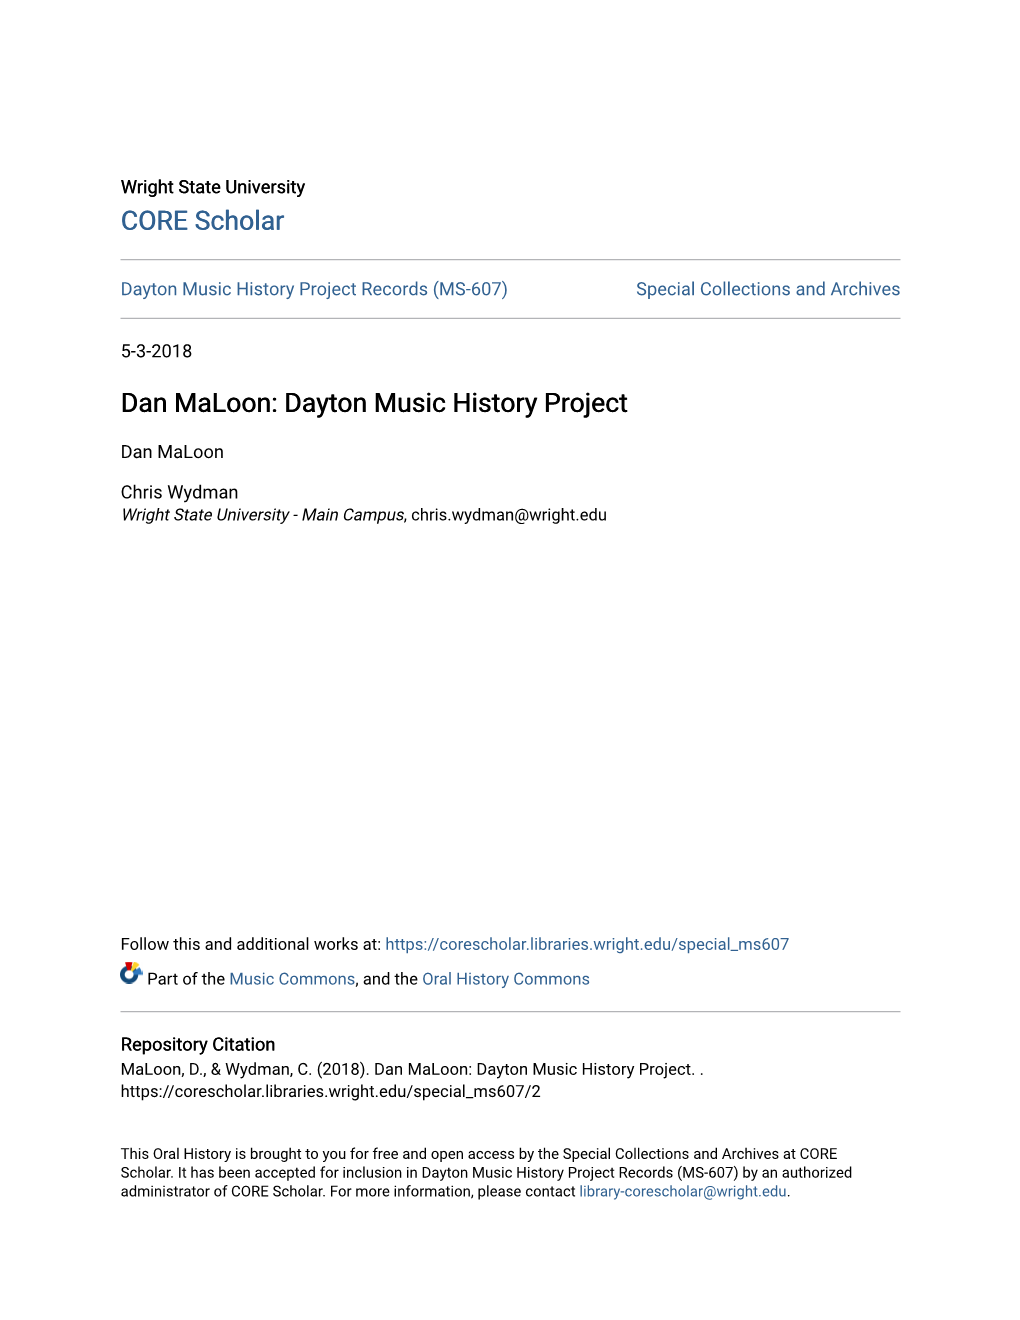 Dayton Music History Project Records (MS-607) Special Collections and Archives